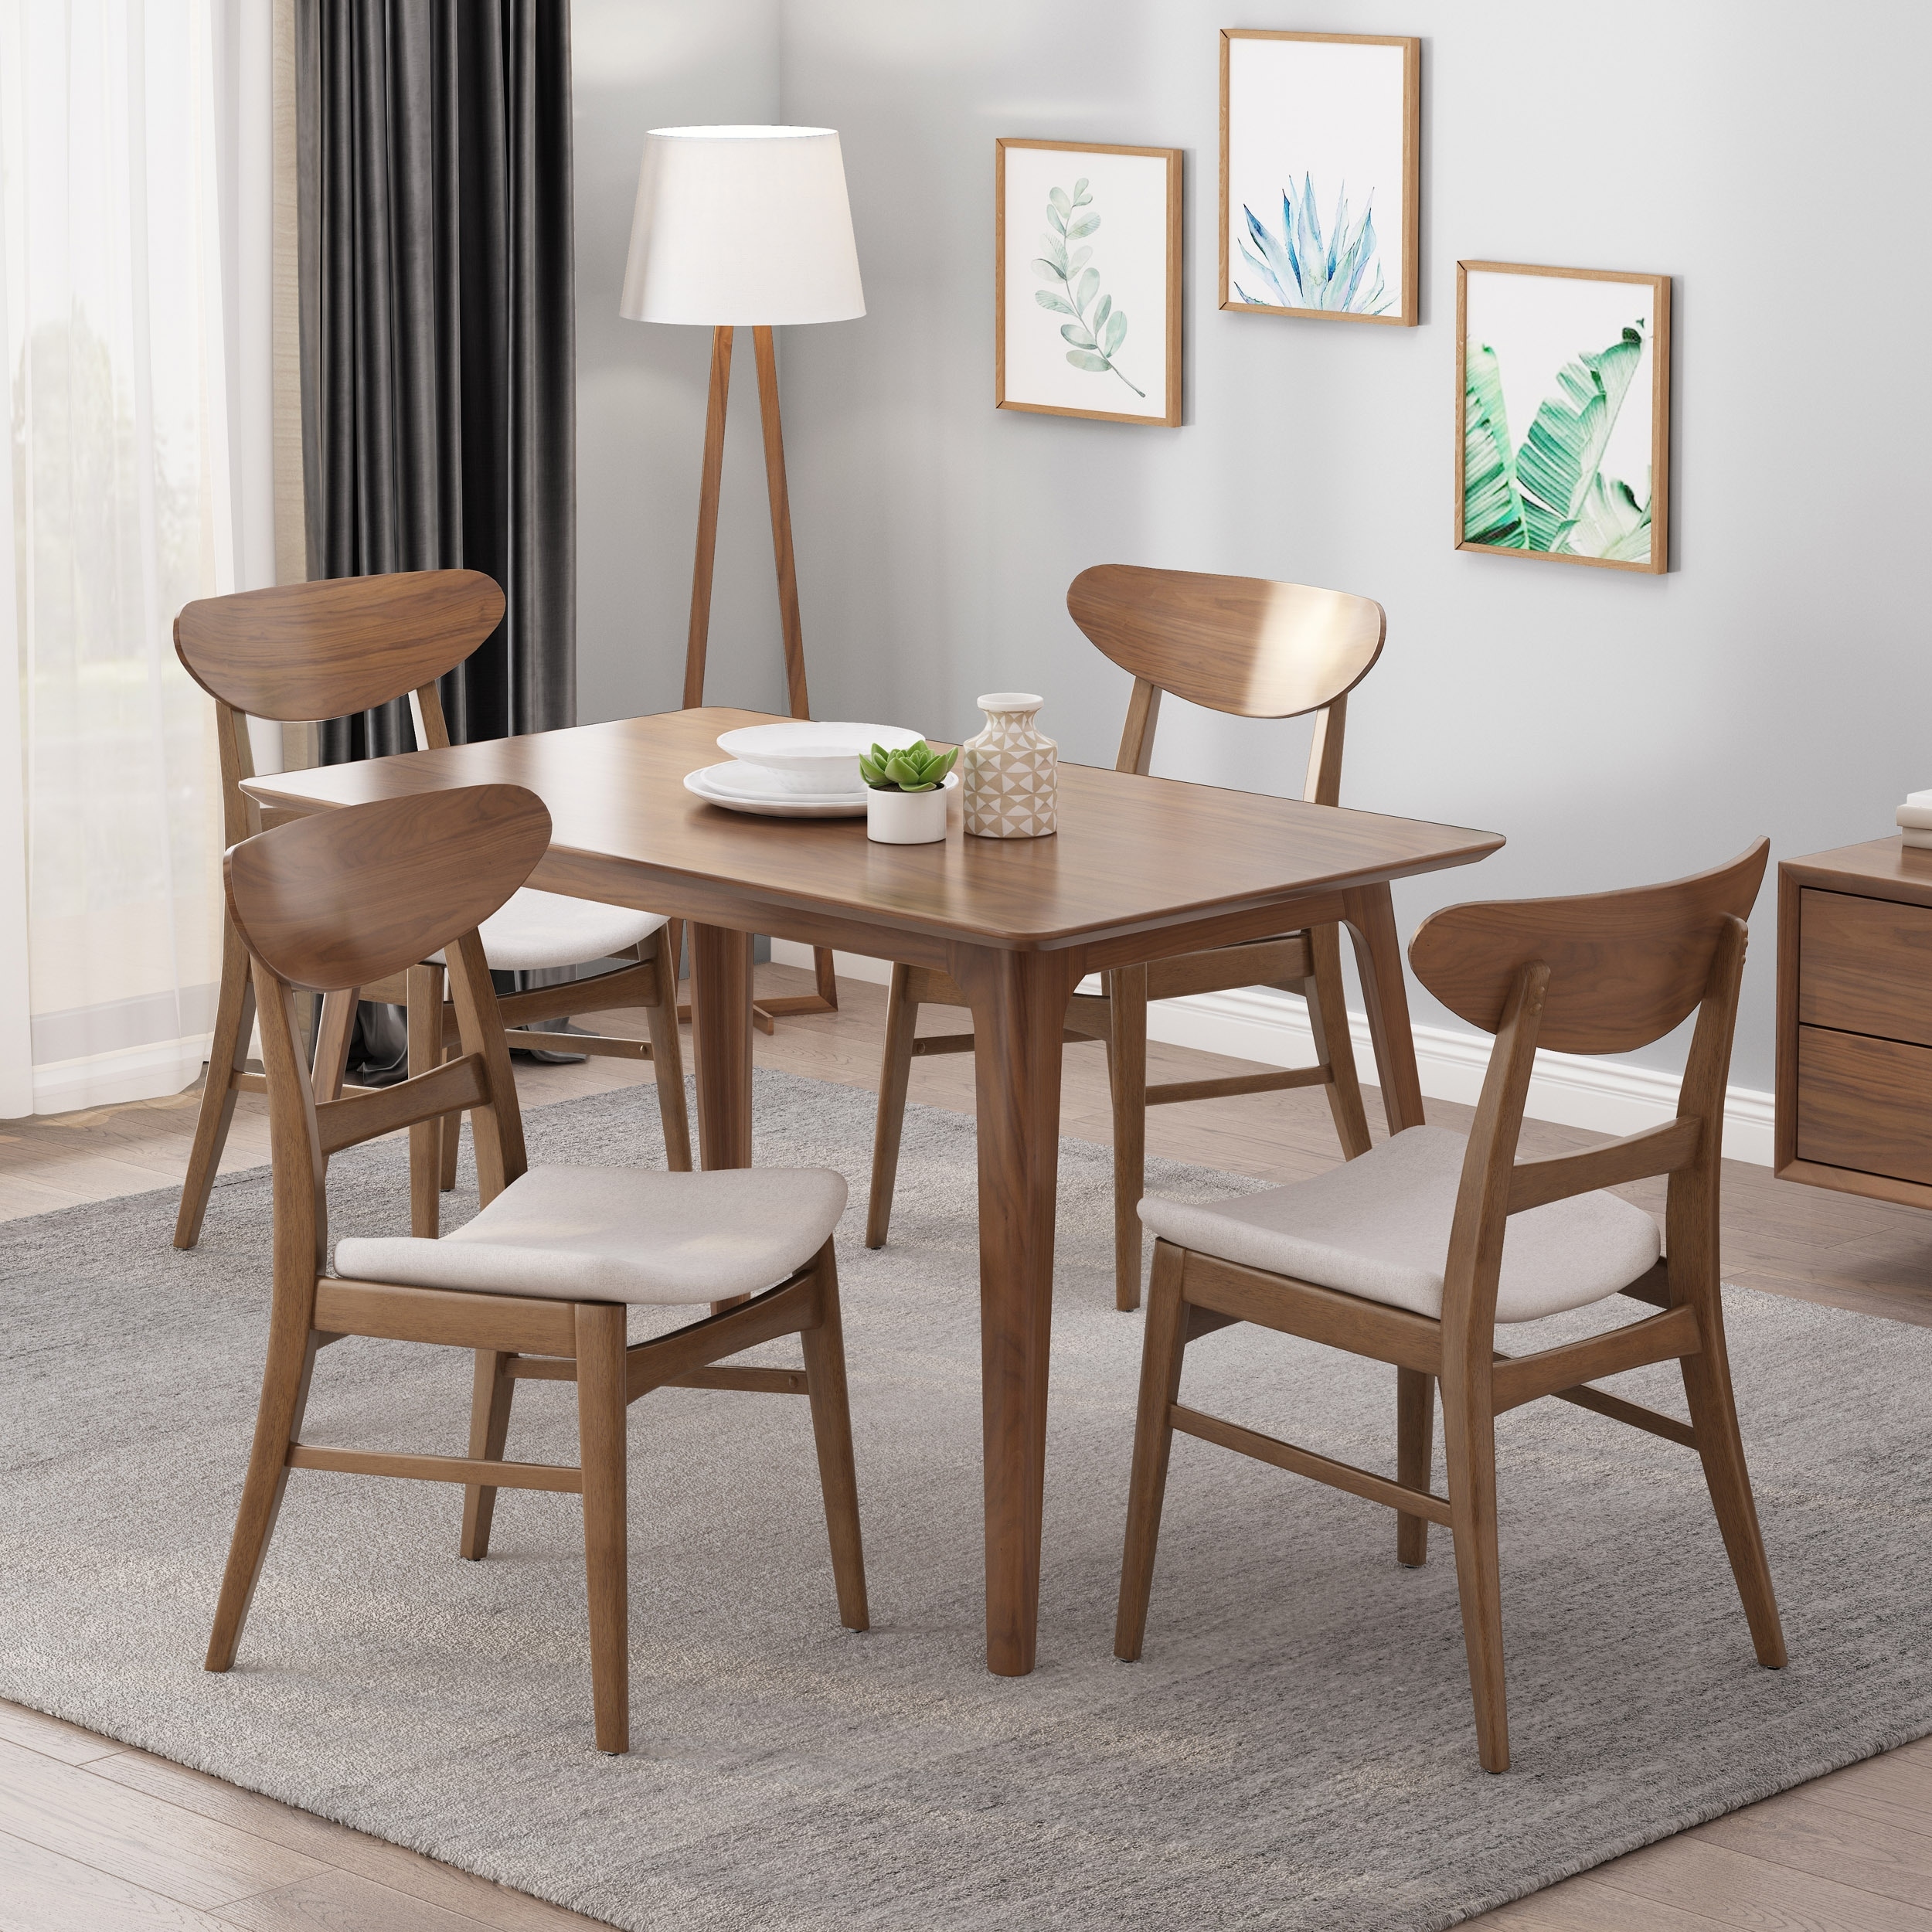 Idalia Mid Century Modern Dining Chairs Set Of 4 By Christopher Knight Home Overstock 31294597